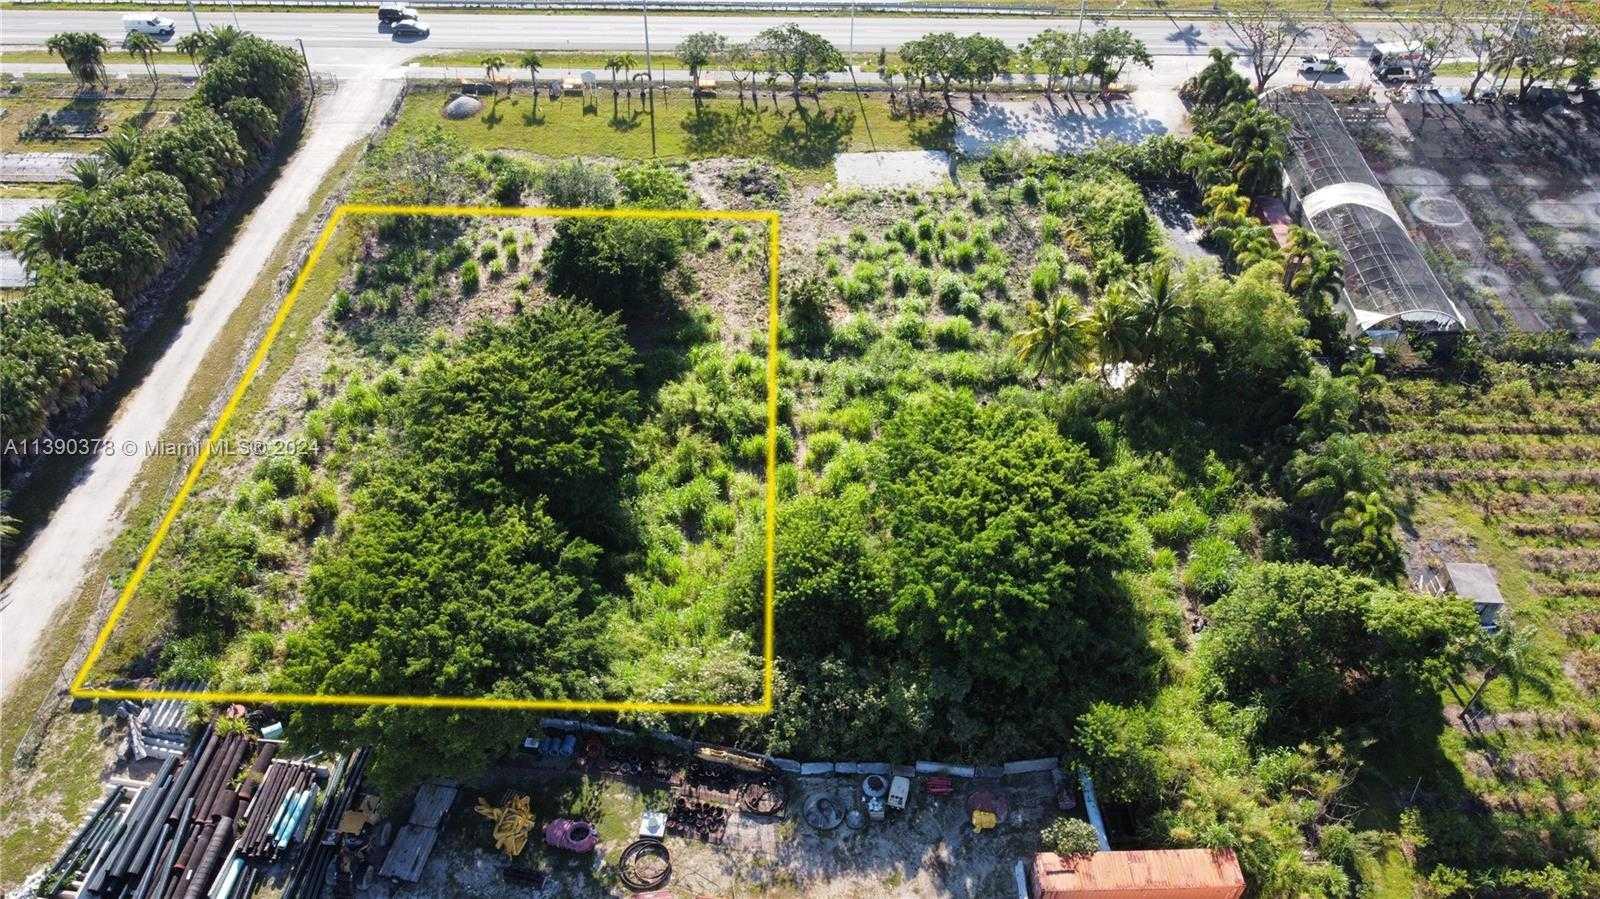 153 153xx 177 ave (Krome), Miami, Commercial Land,  for sale, Test Realtyworld broker